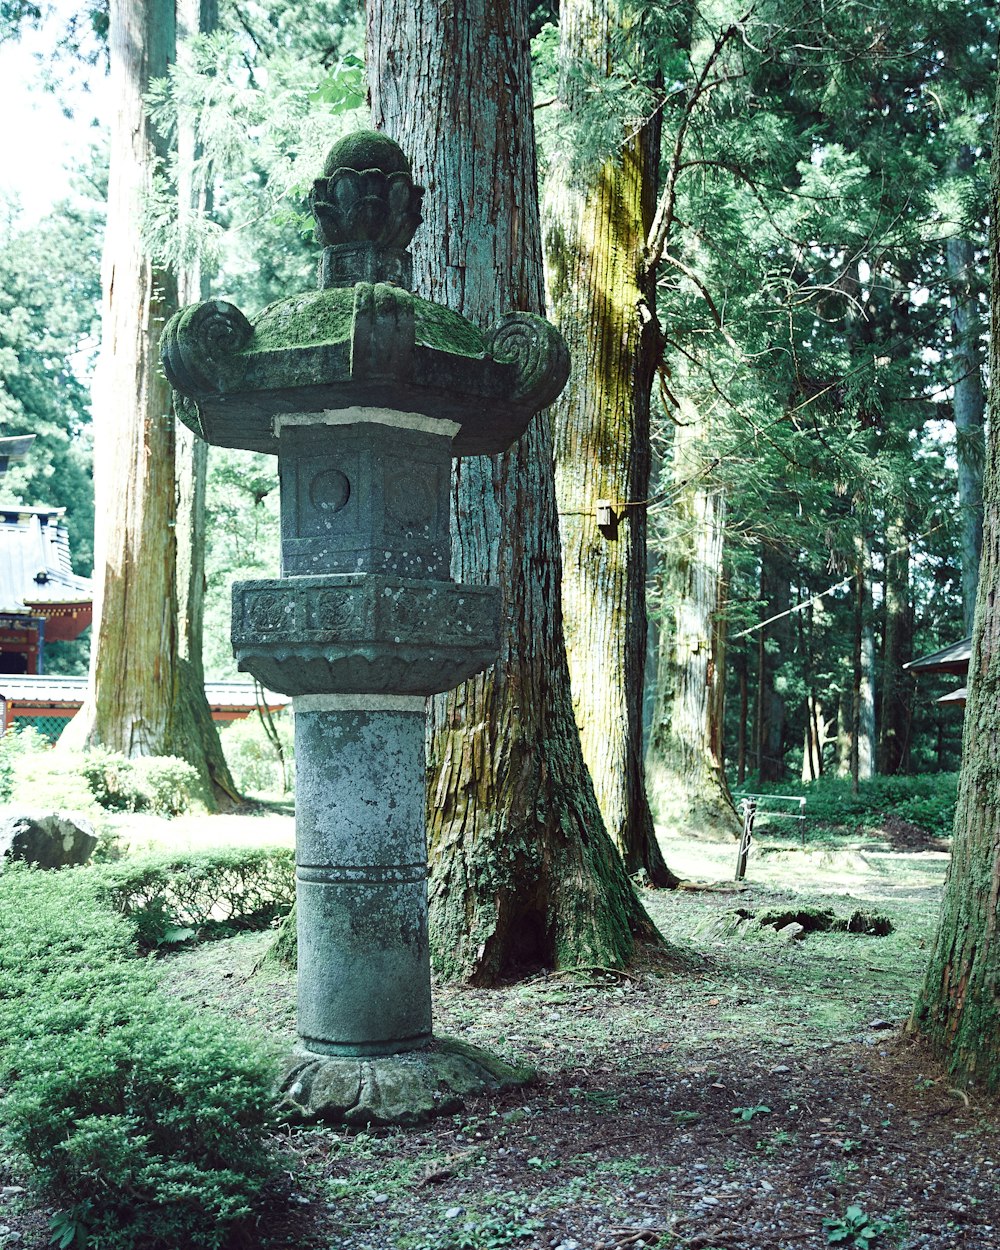 a statue of a person in a forest